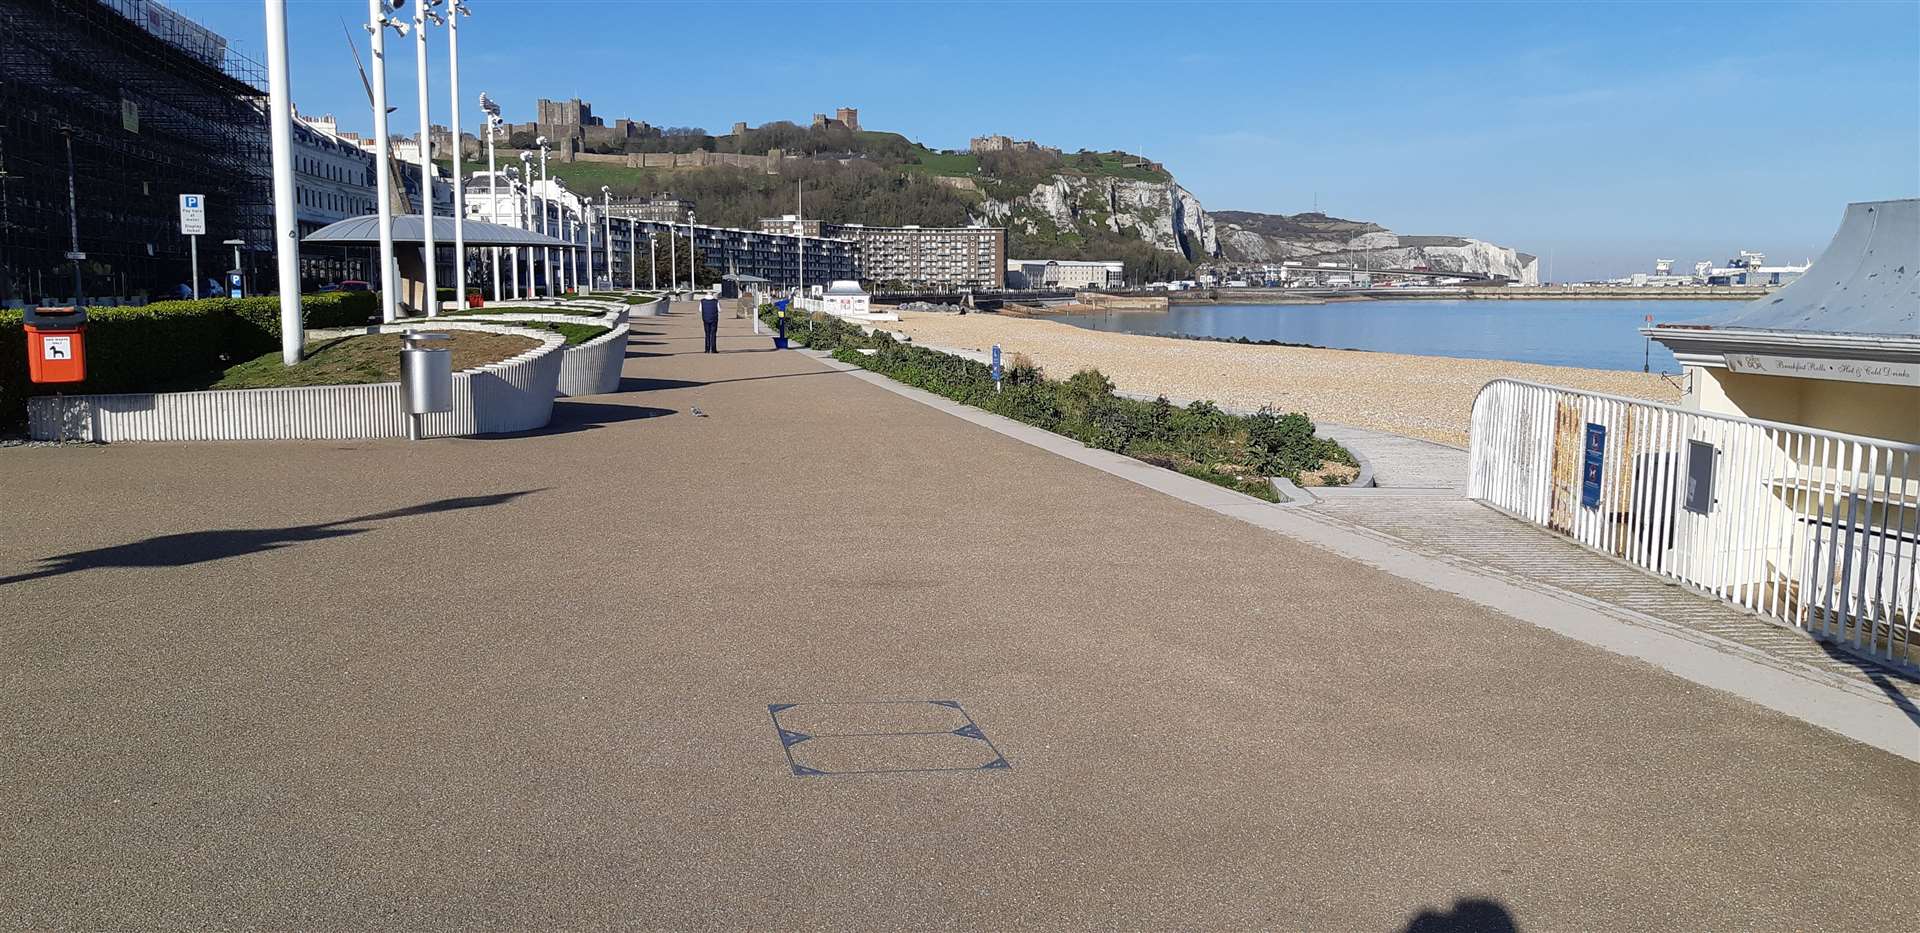 Dover Seafront abandoned on a sunny day after the first lockdown, March 24, 2020